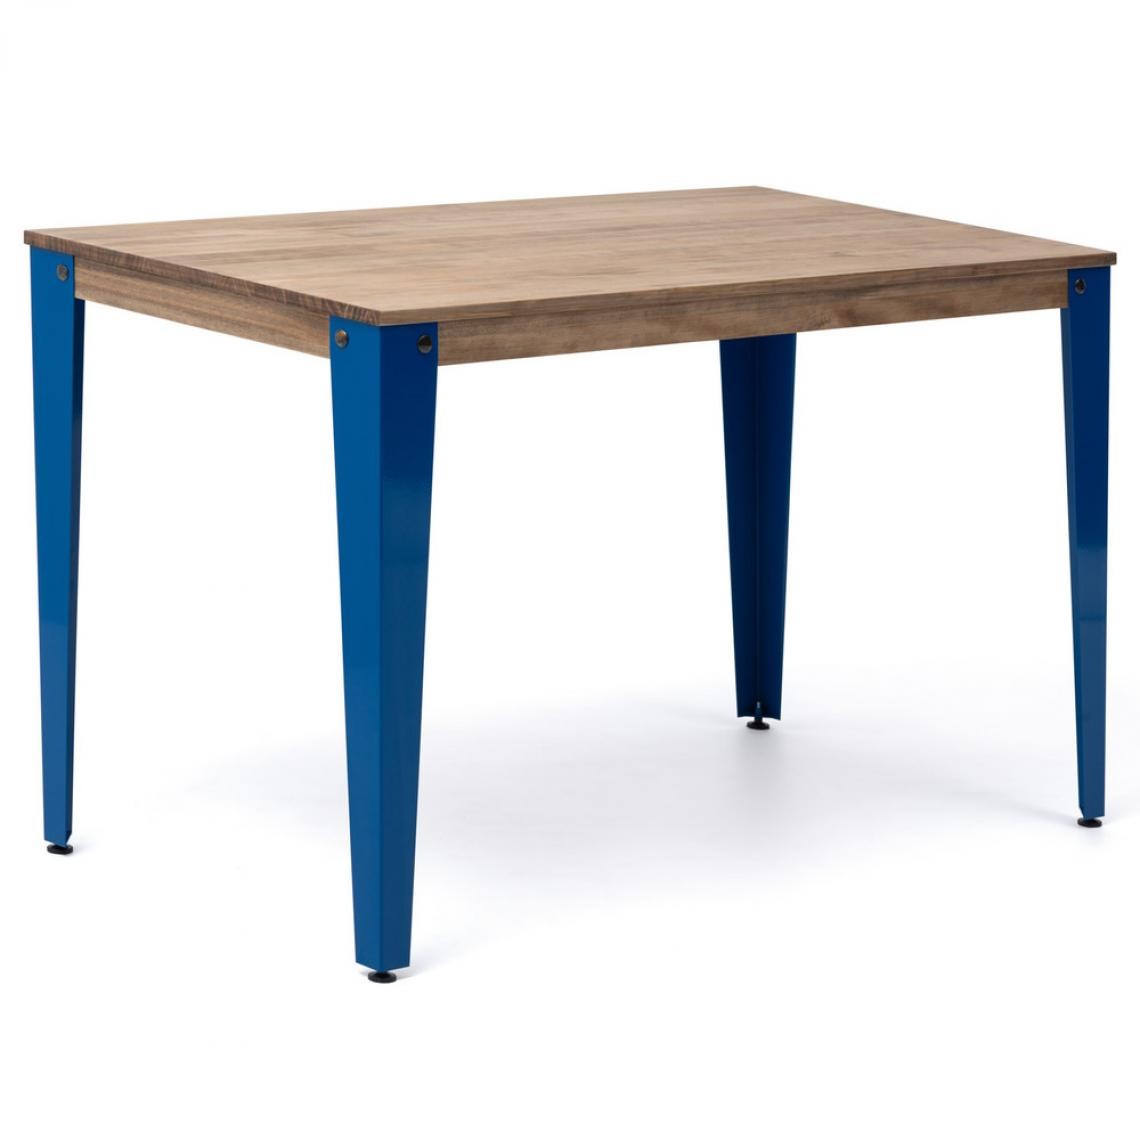 BOX FURNITURE - Table Salle a Manger Lunds 160x80x75cm Bleu-Vieilli Box Furniture - Tables à manger